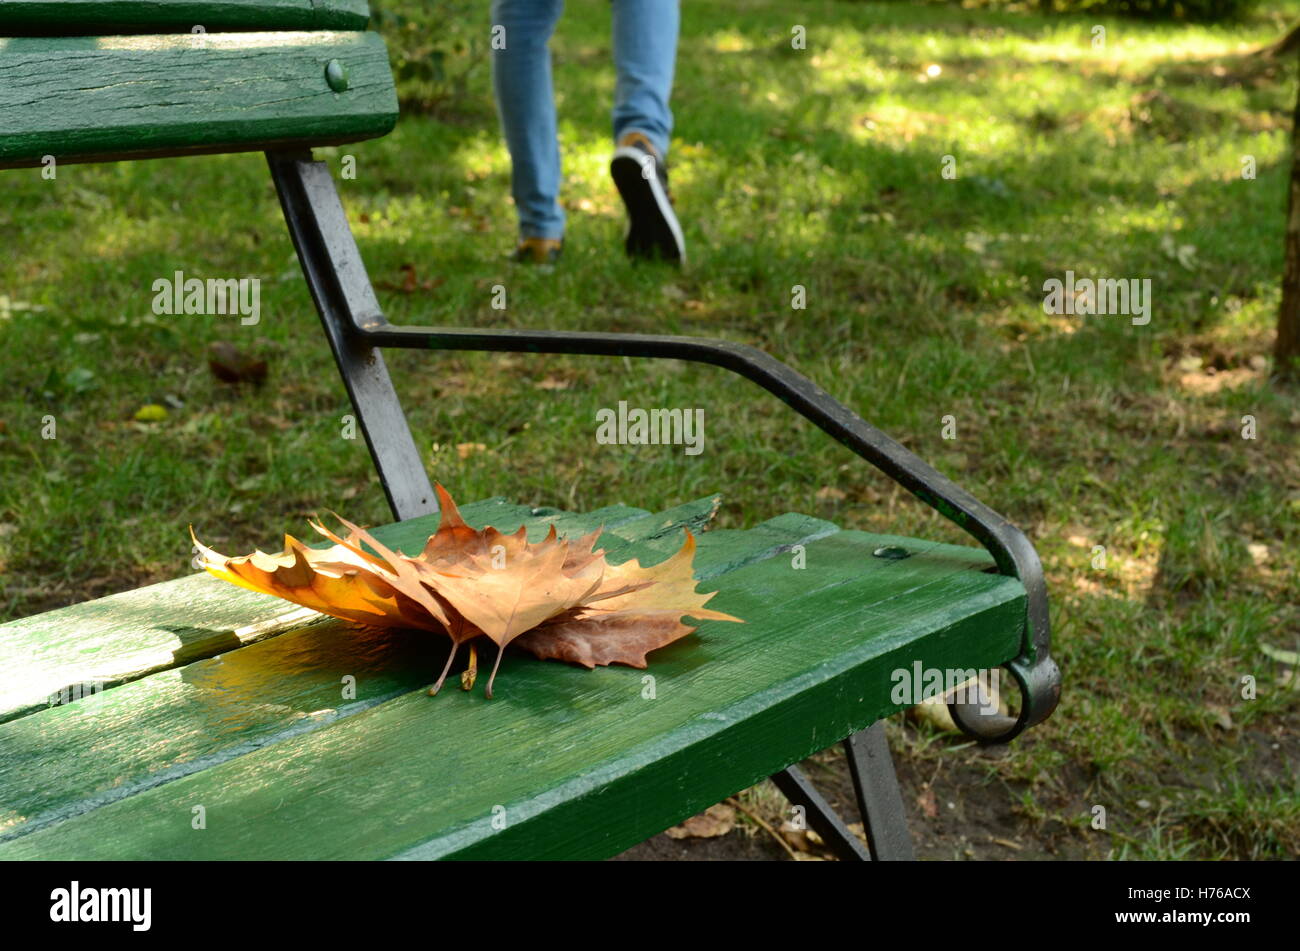 Man walking away from bench with autumn leaves on it Stock Photo